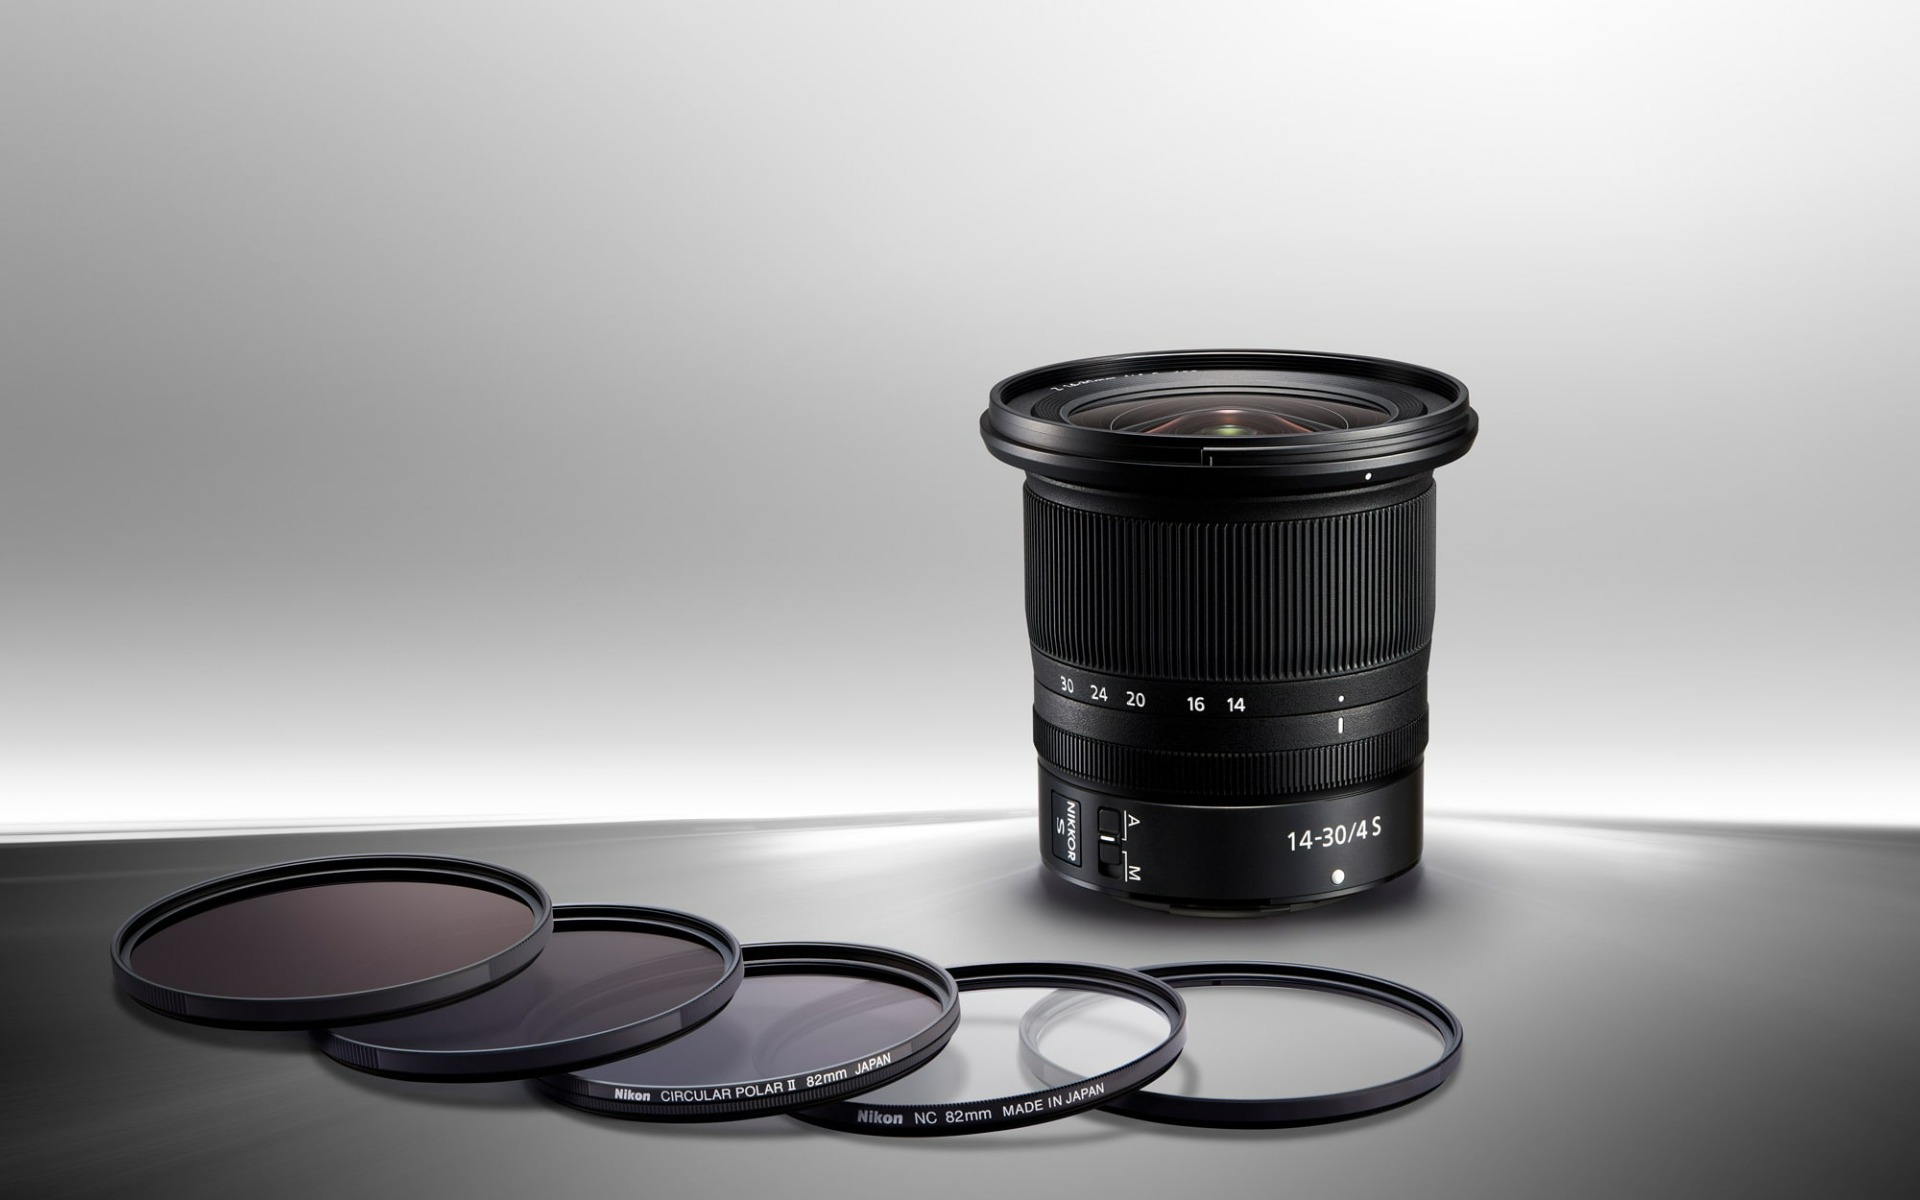 World’s first* 14mm filter-attachable lens